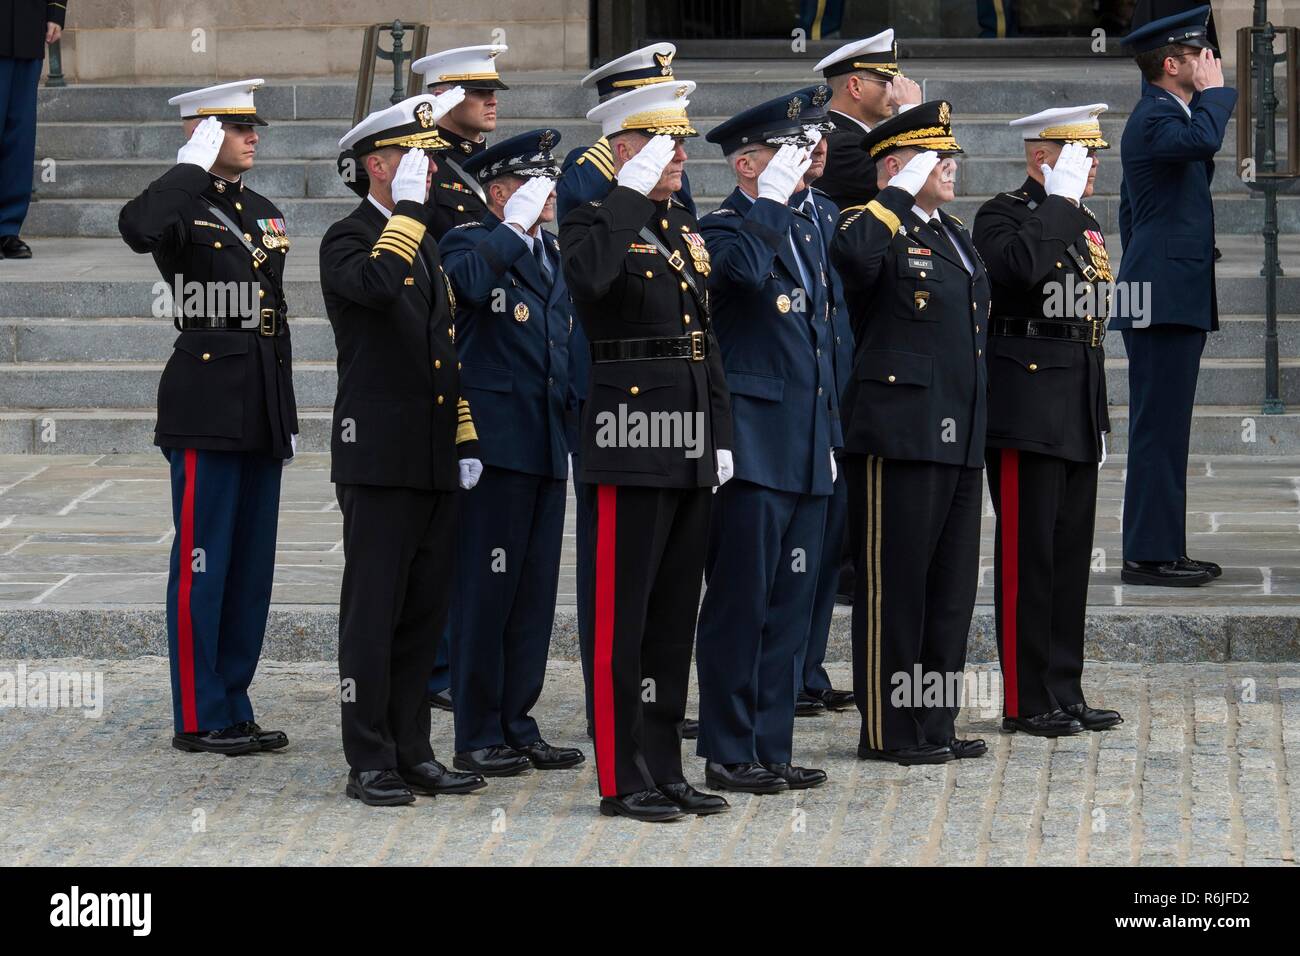 Members of the U.S. Joint Service Chiefs salute as the casket of former president George H.W. Bush is carried to a hearse following the State Funeral outside Washington National Cathedral December 5, 2018 in Washington, DC. Bush, the 41st President, died in his Houston home at age 94. Standing from left to right are: Chairman of the Joint Chiefs Gen. Joseph Dunford, Vice Chairman Paul J. Selva, Army Chief General Mark A. Milley and Marine Corps Chief General Robert B. Neller. Stock Photo